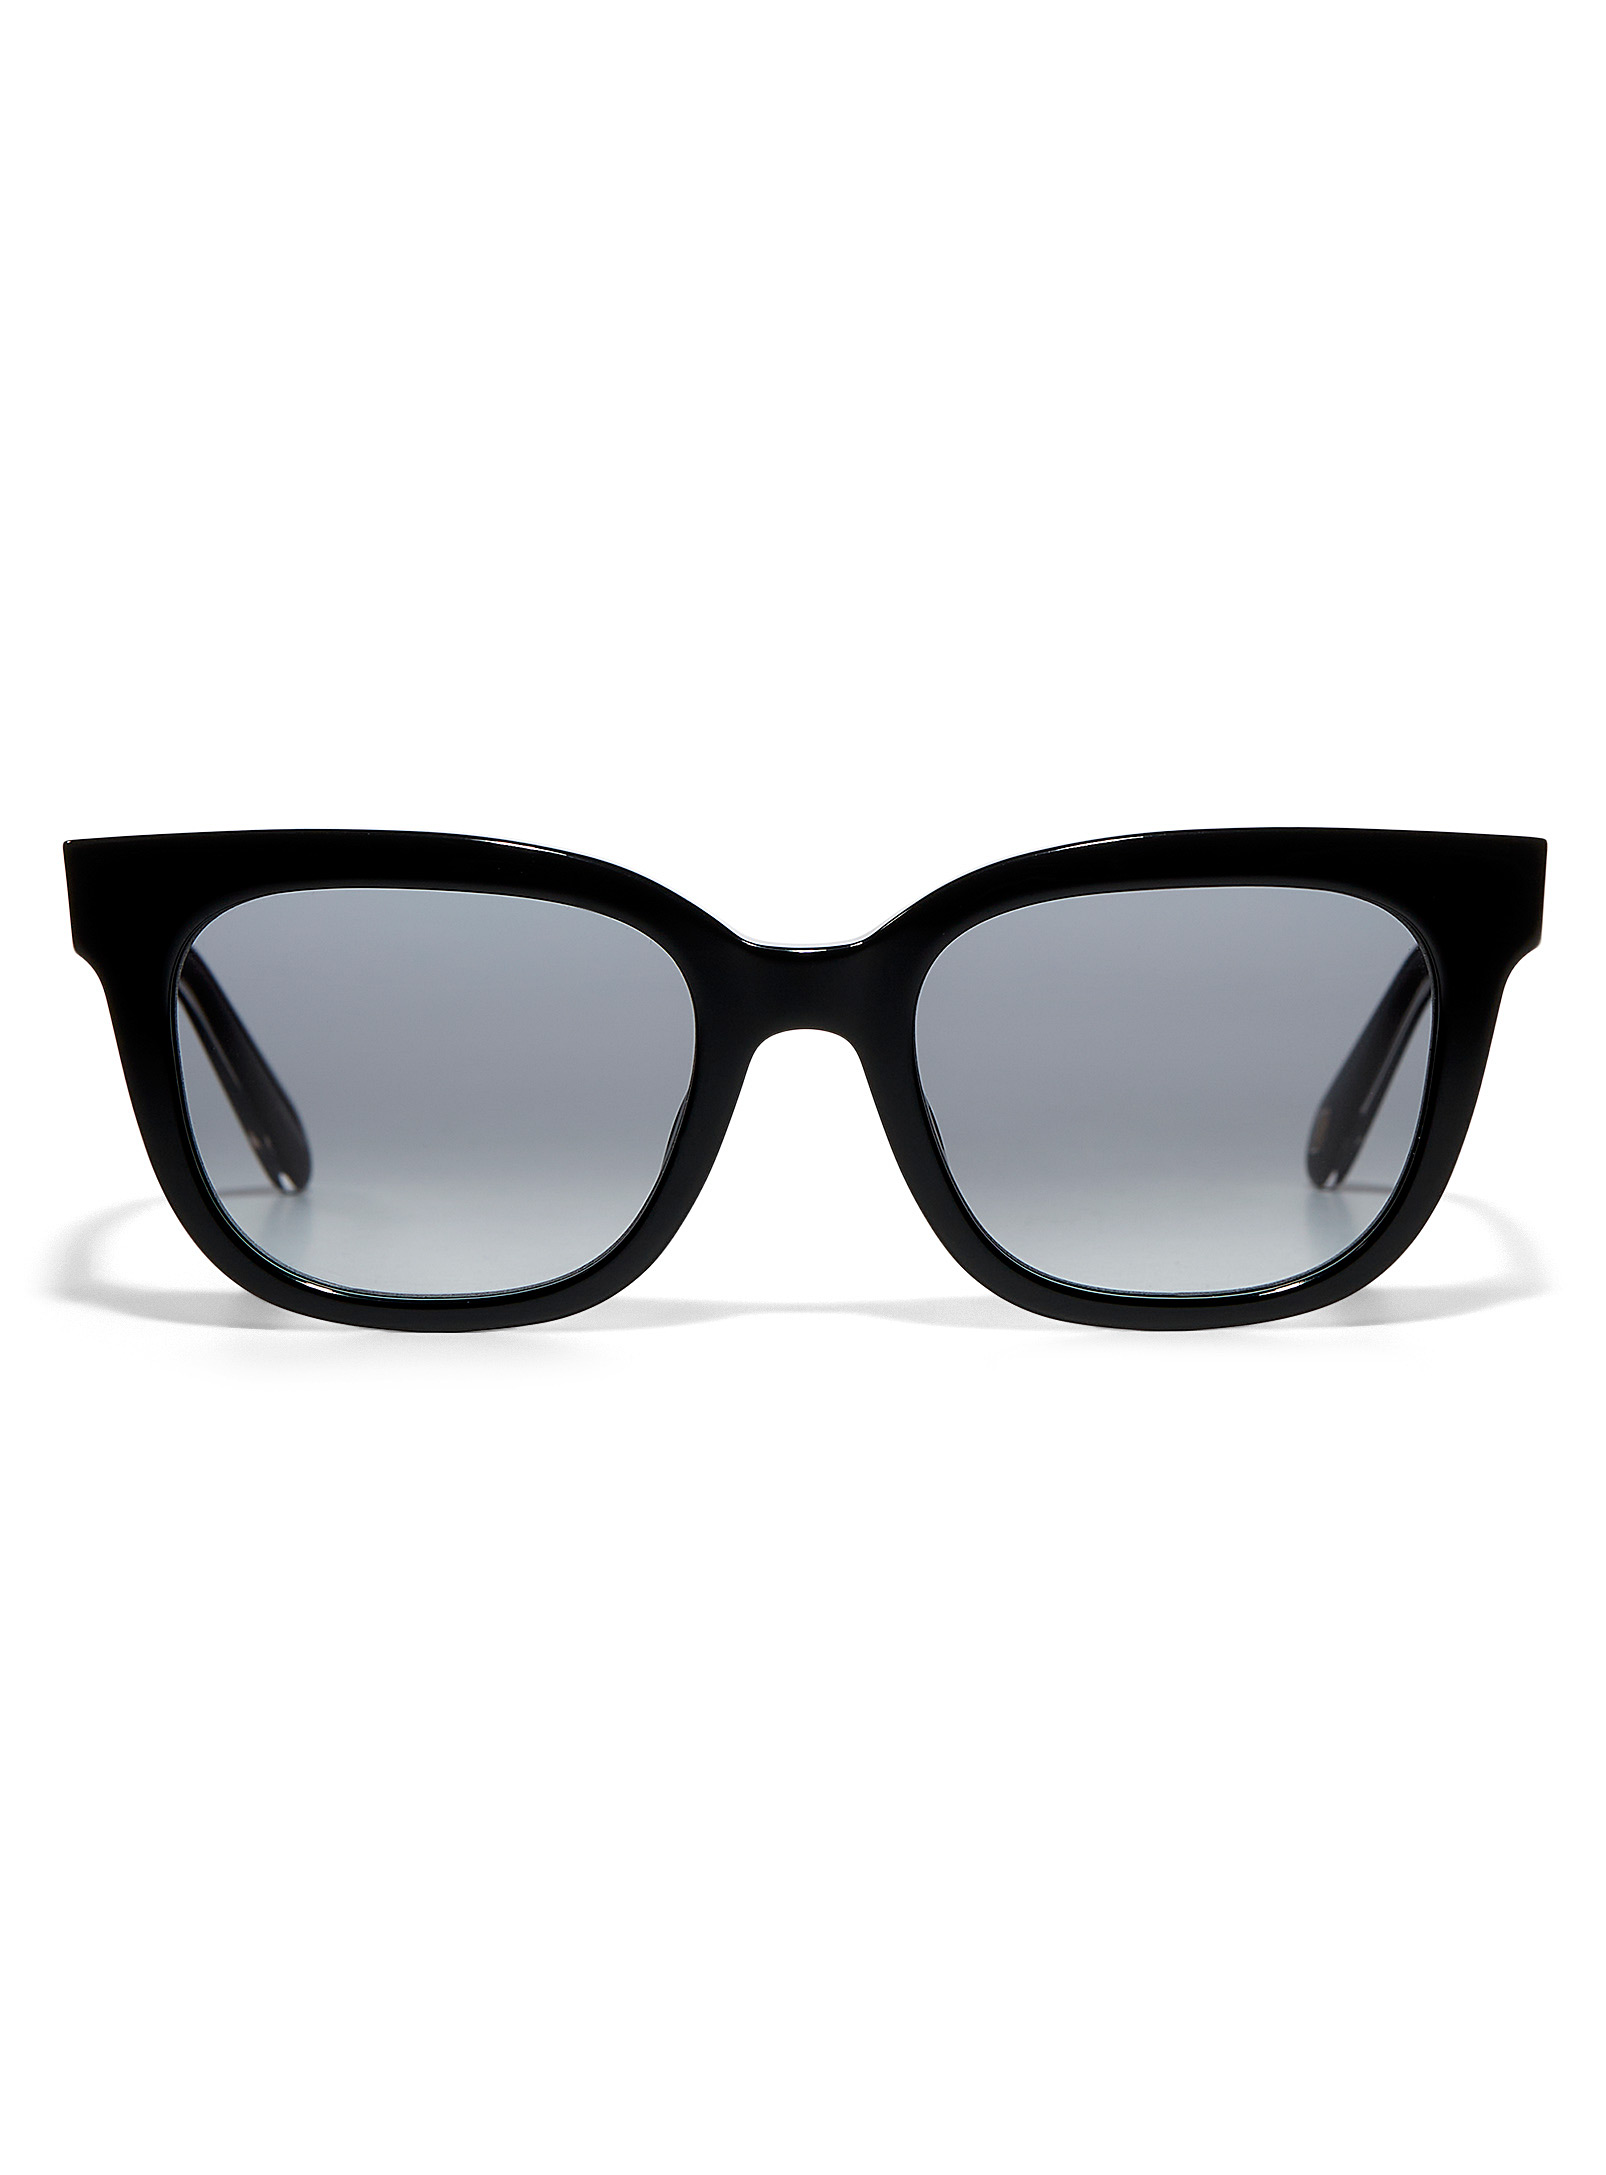 Fossil Embedded Temple Square Sunglasses In Black